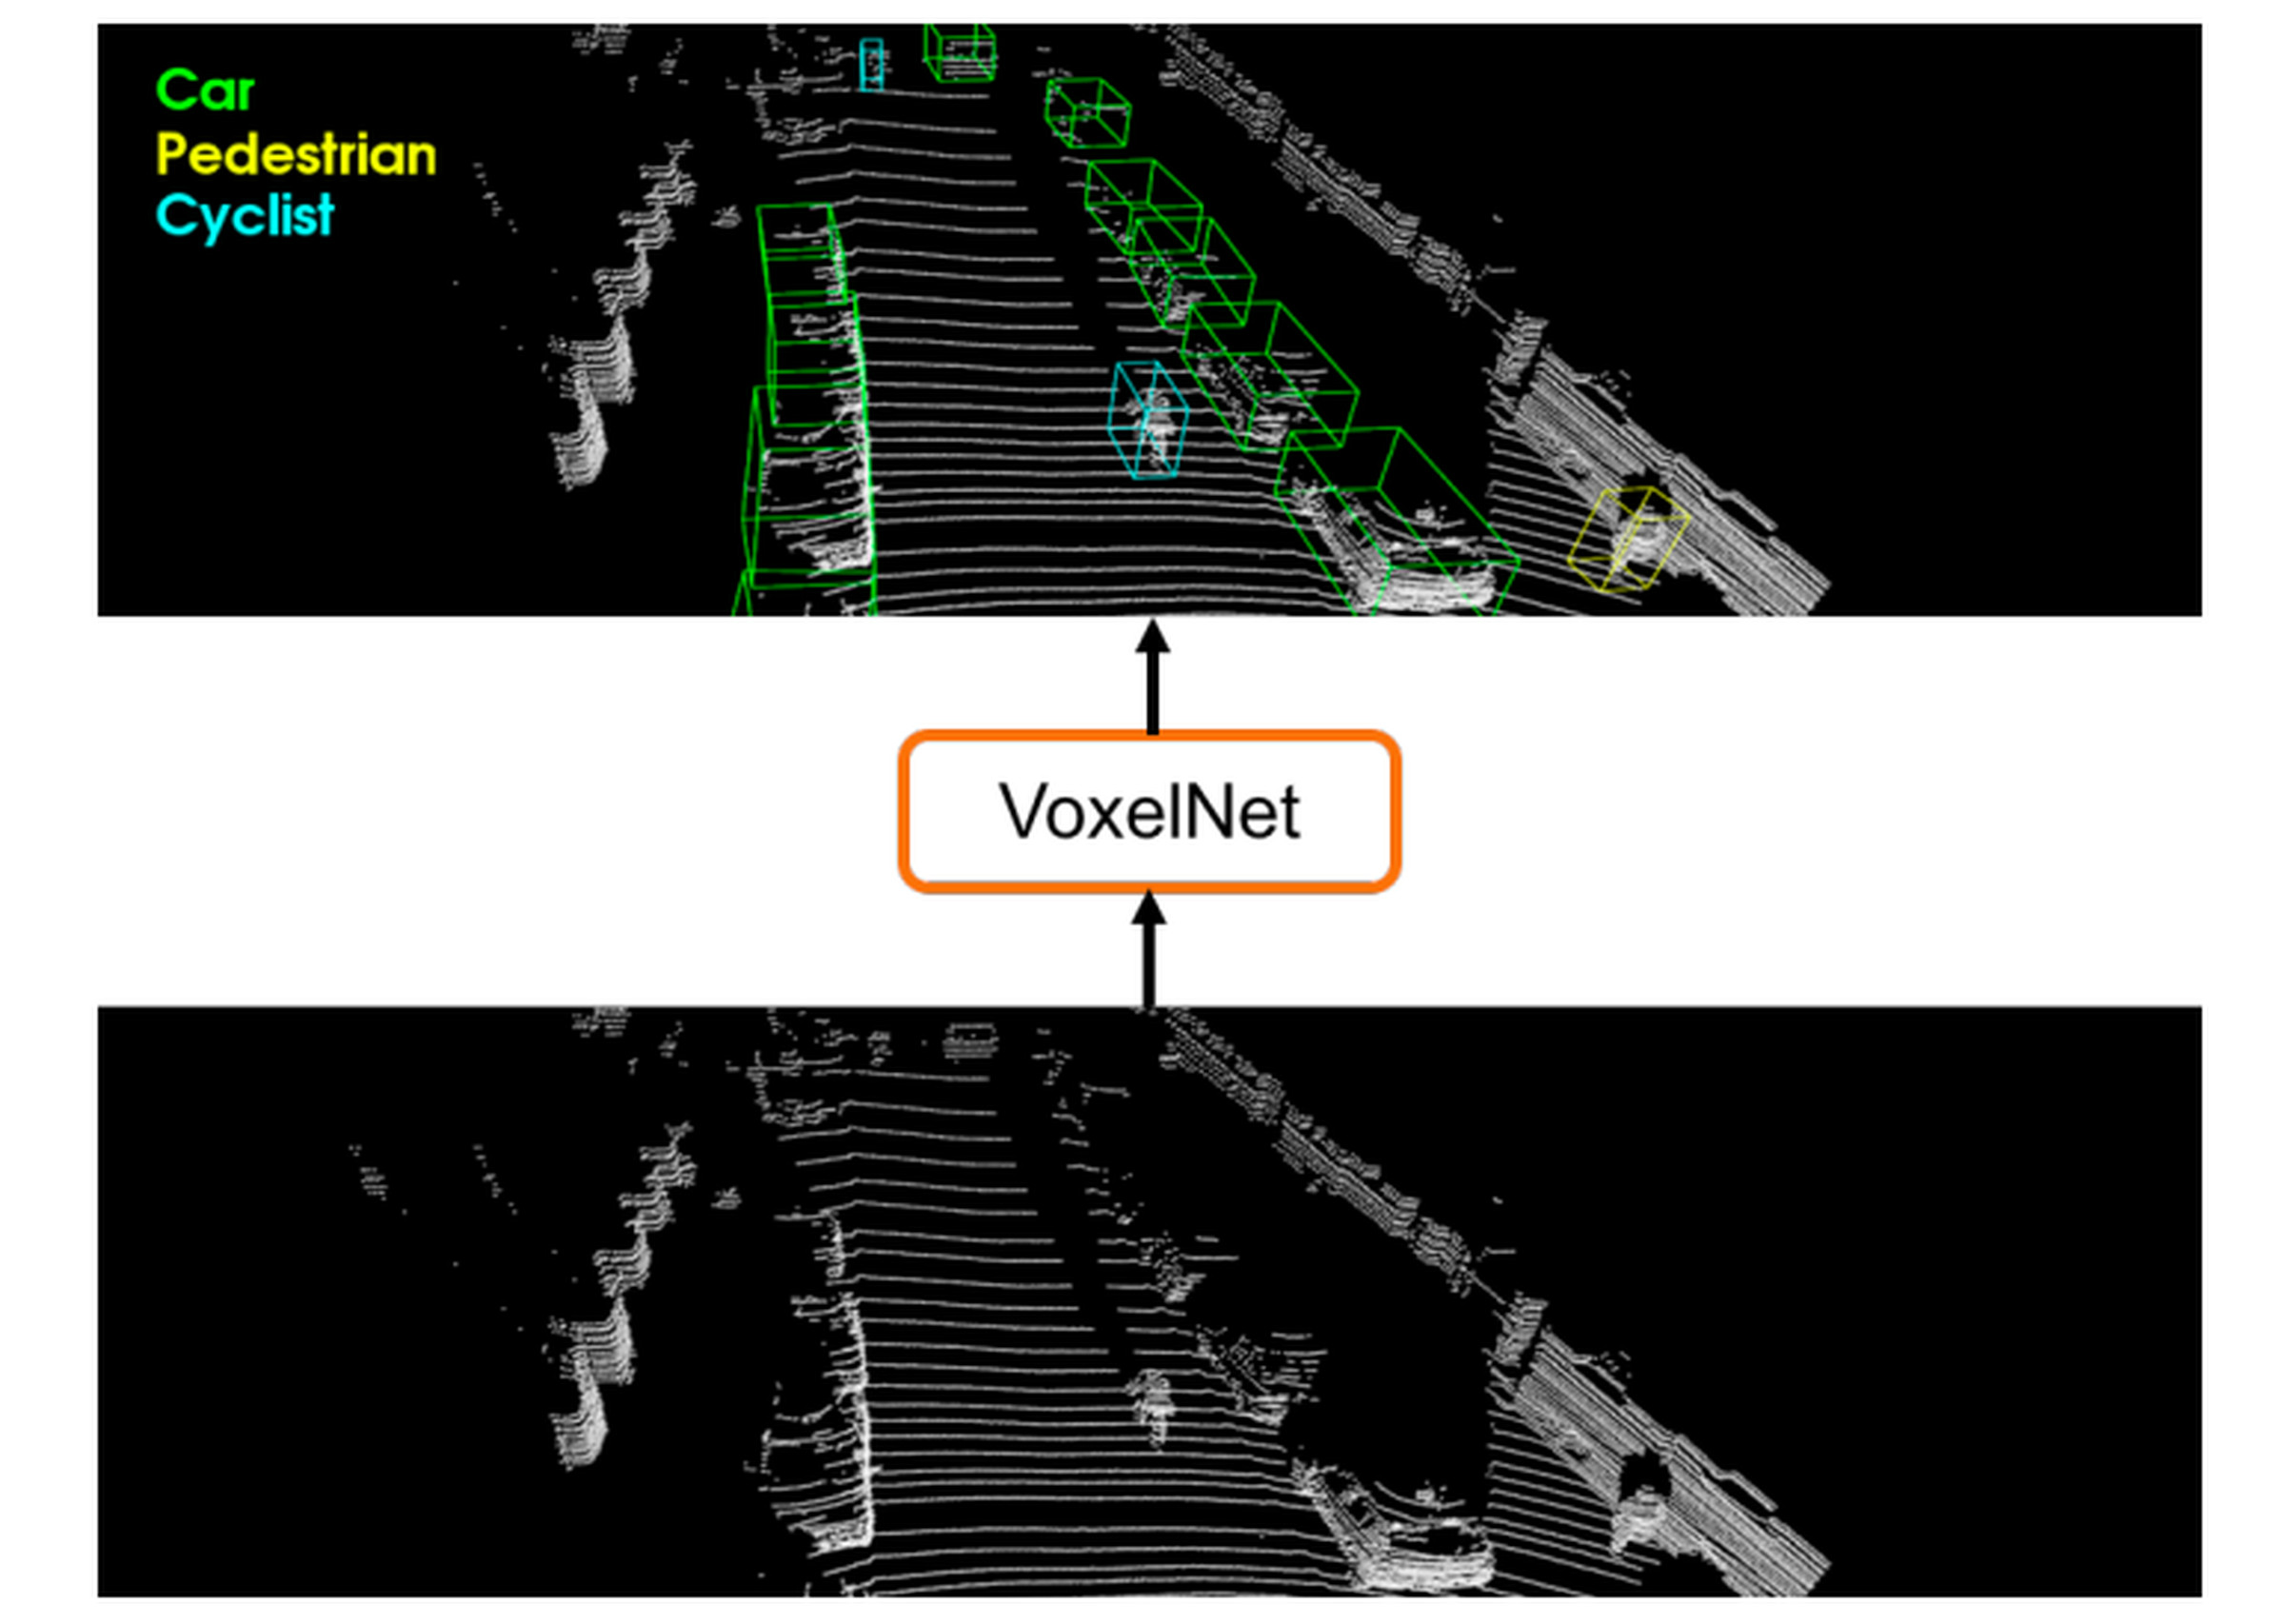 A slide from the paper showing VoxelNet identifying objects in 3D LIDAR data.